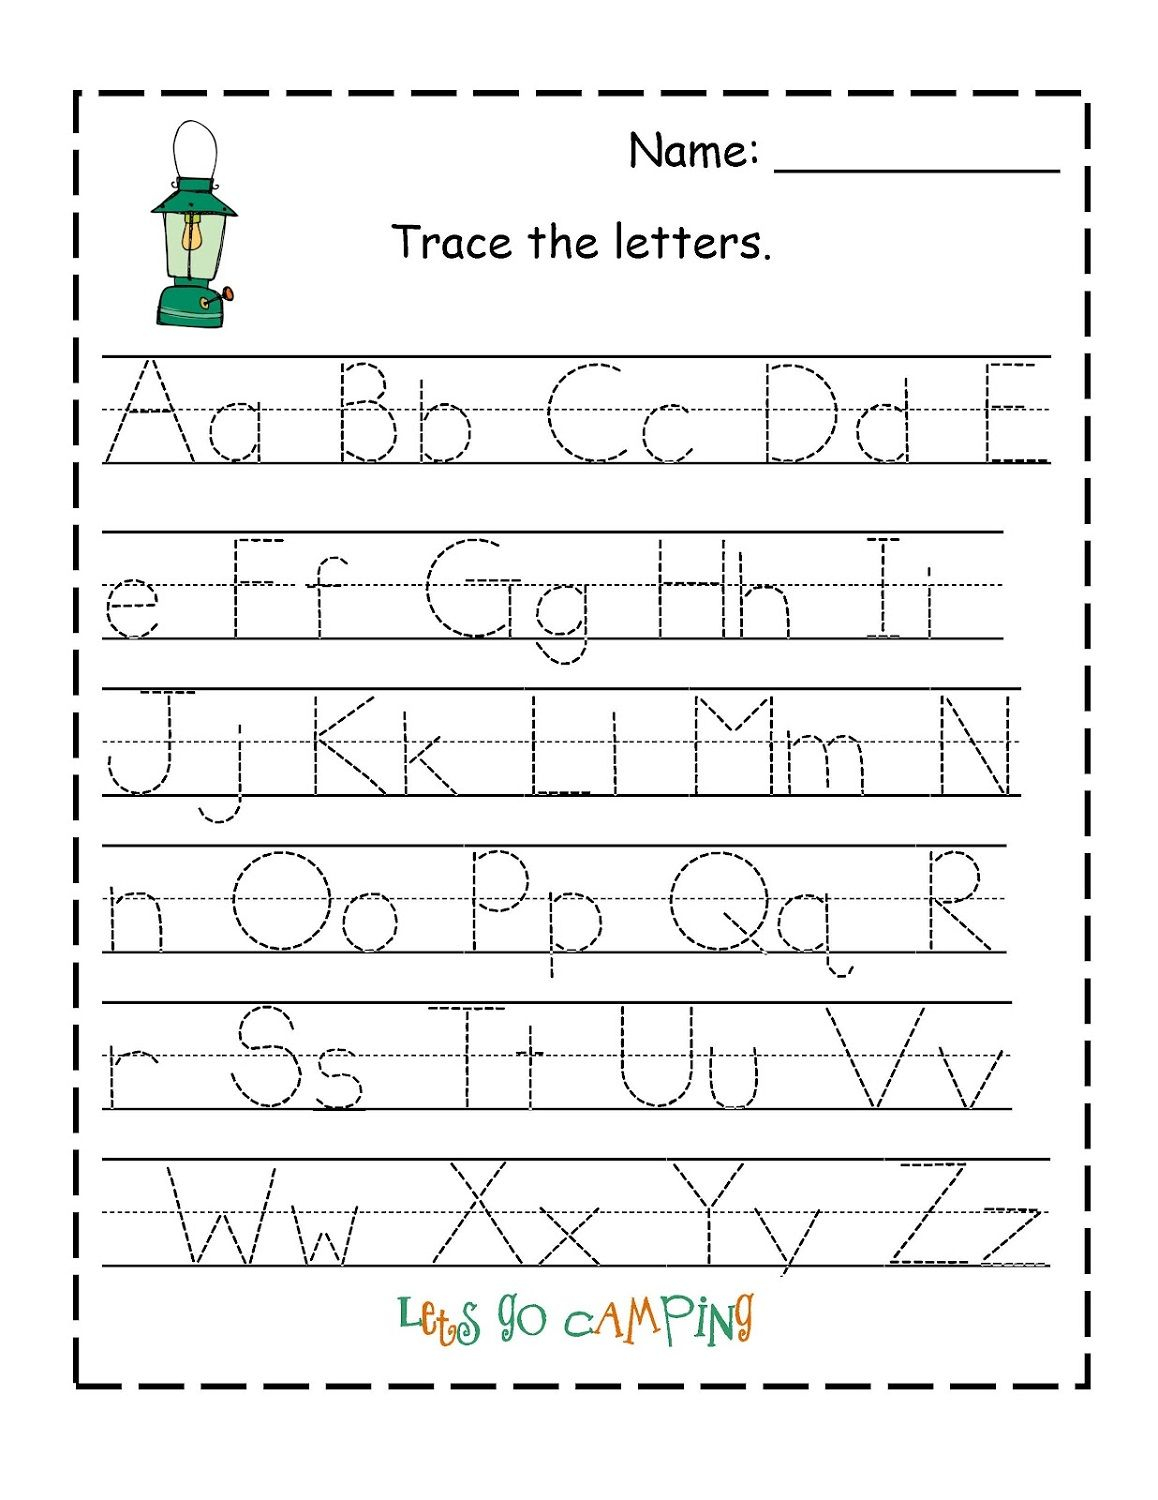 Traceable Alphabet Worksheets A-Z In 2020 | Alphabet in Alphabet Worksheets A Z With Pictures